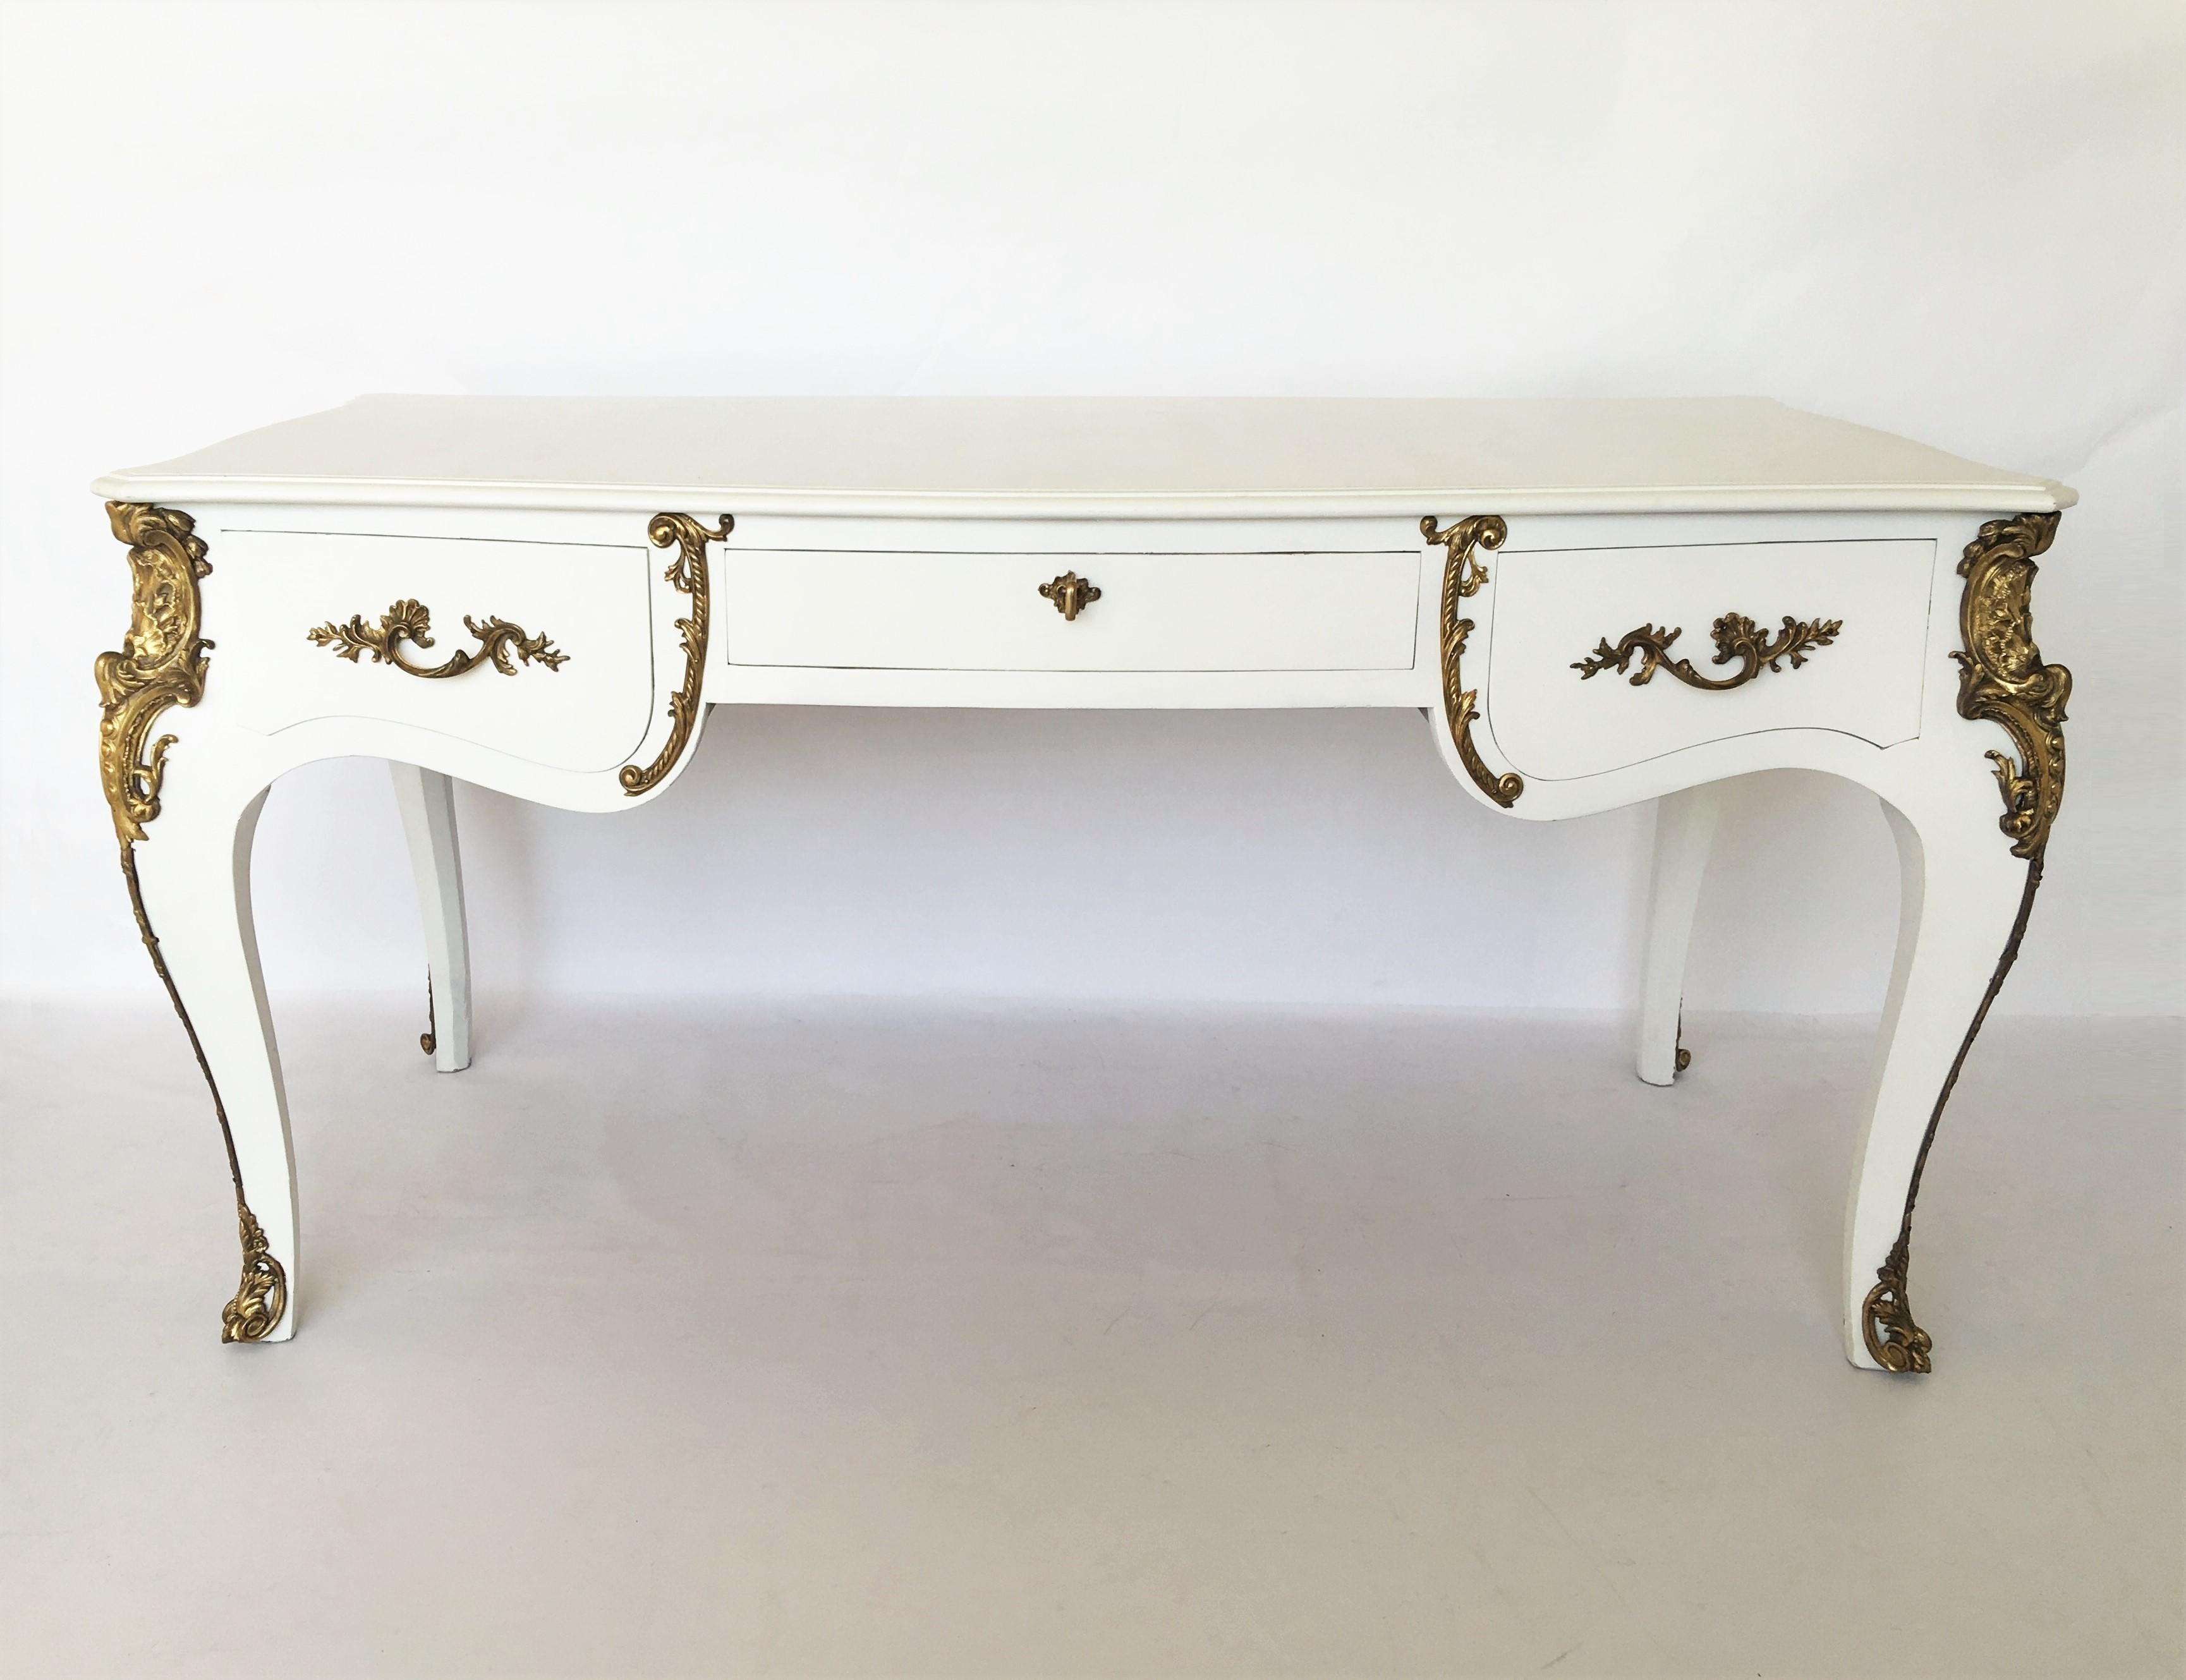 Fine, French bureau plat or writing table desk. Made in the grand Louis XV taste featuring bronze mounts with white lacquered frame. With original key. Fine rocaille motif moulded mounts throughout, one side with three, deep space pull-out drawers,